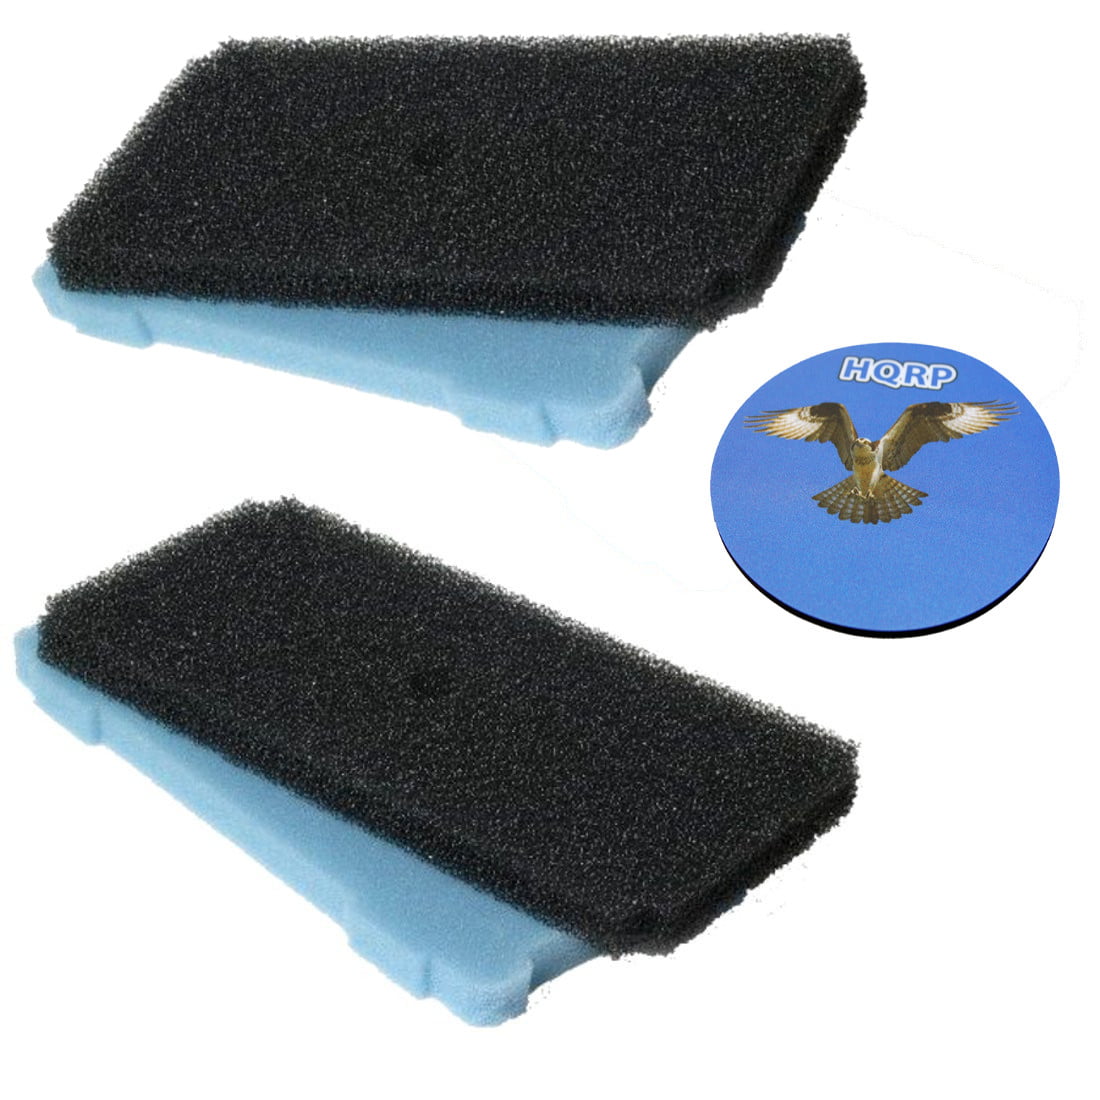 2x HQRP Blue & Black Pre-Filters for Sunterra 320106 337106 Pond Canister Filter 